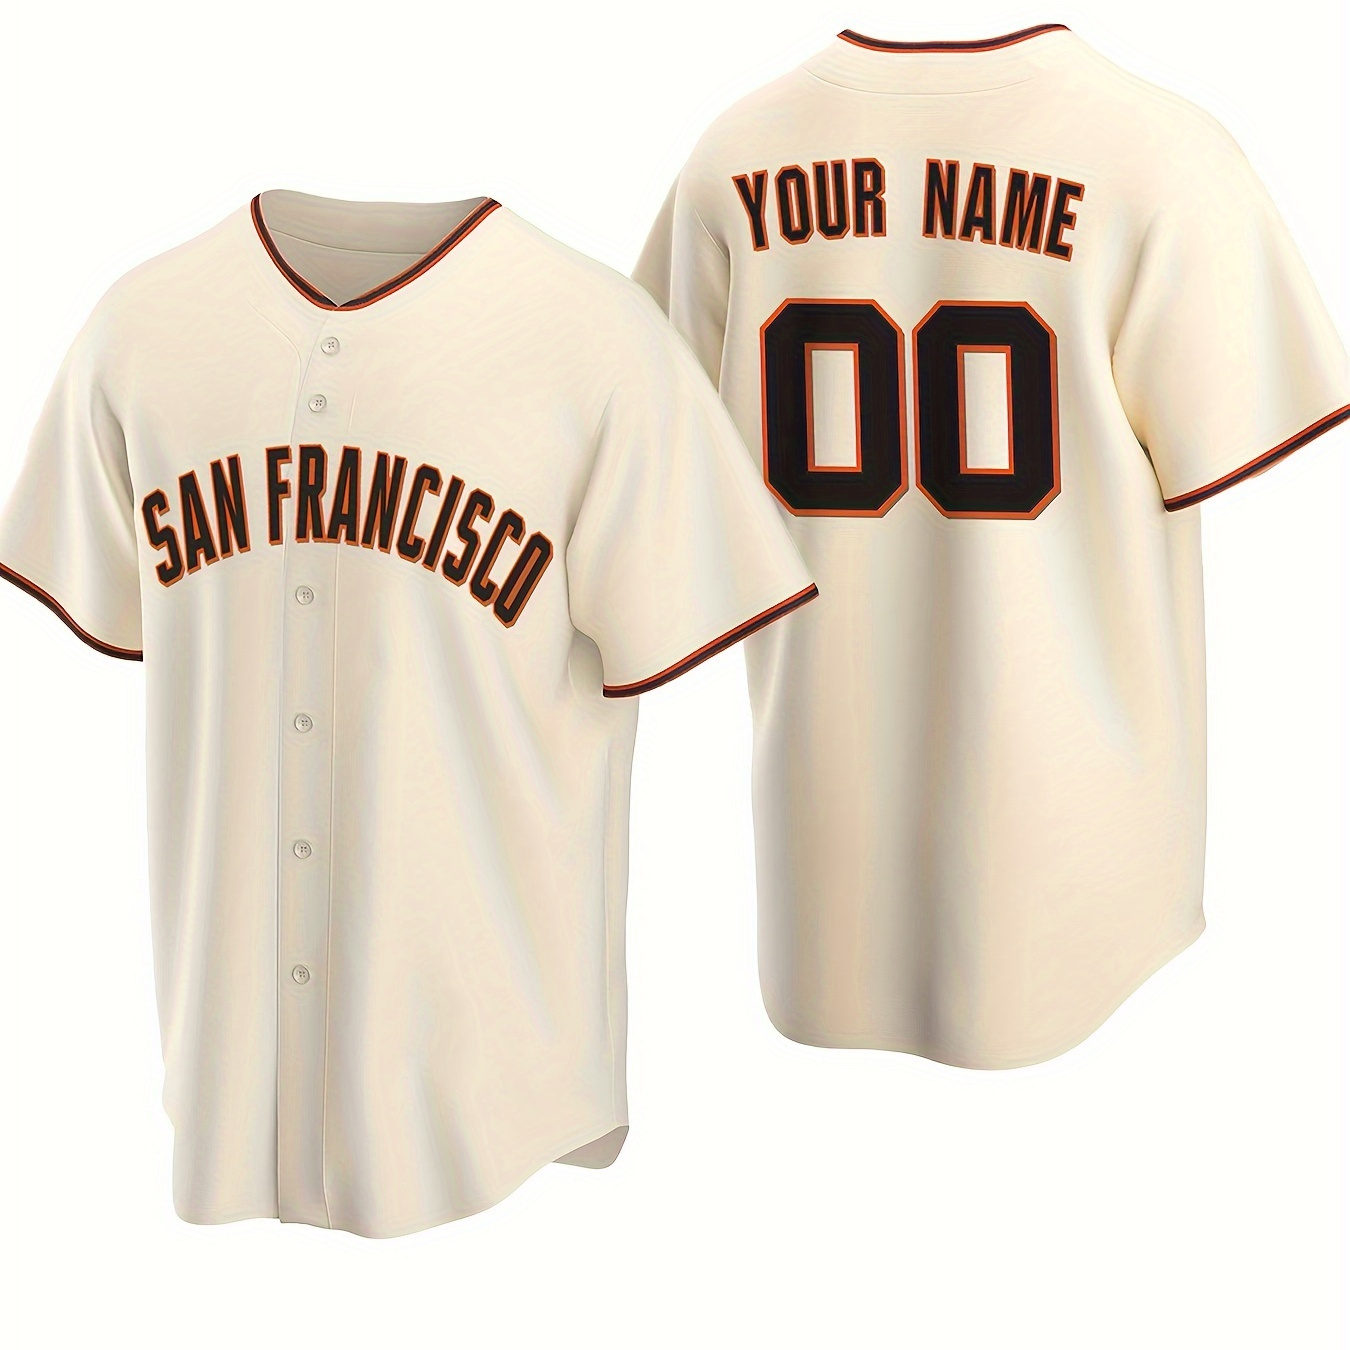 

Men's Jersey With Customizable Name And Number Print, Embroidered Leisure Sports Customization Men's Baseball Jersey